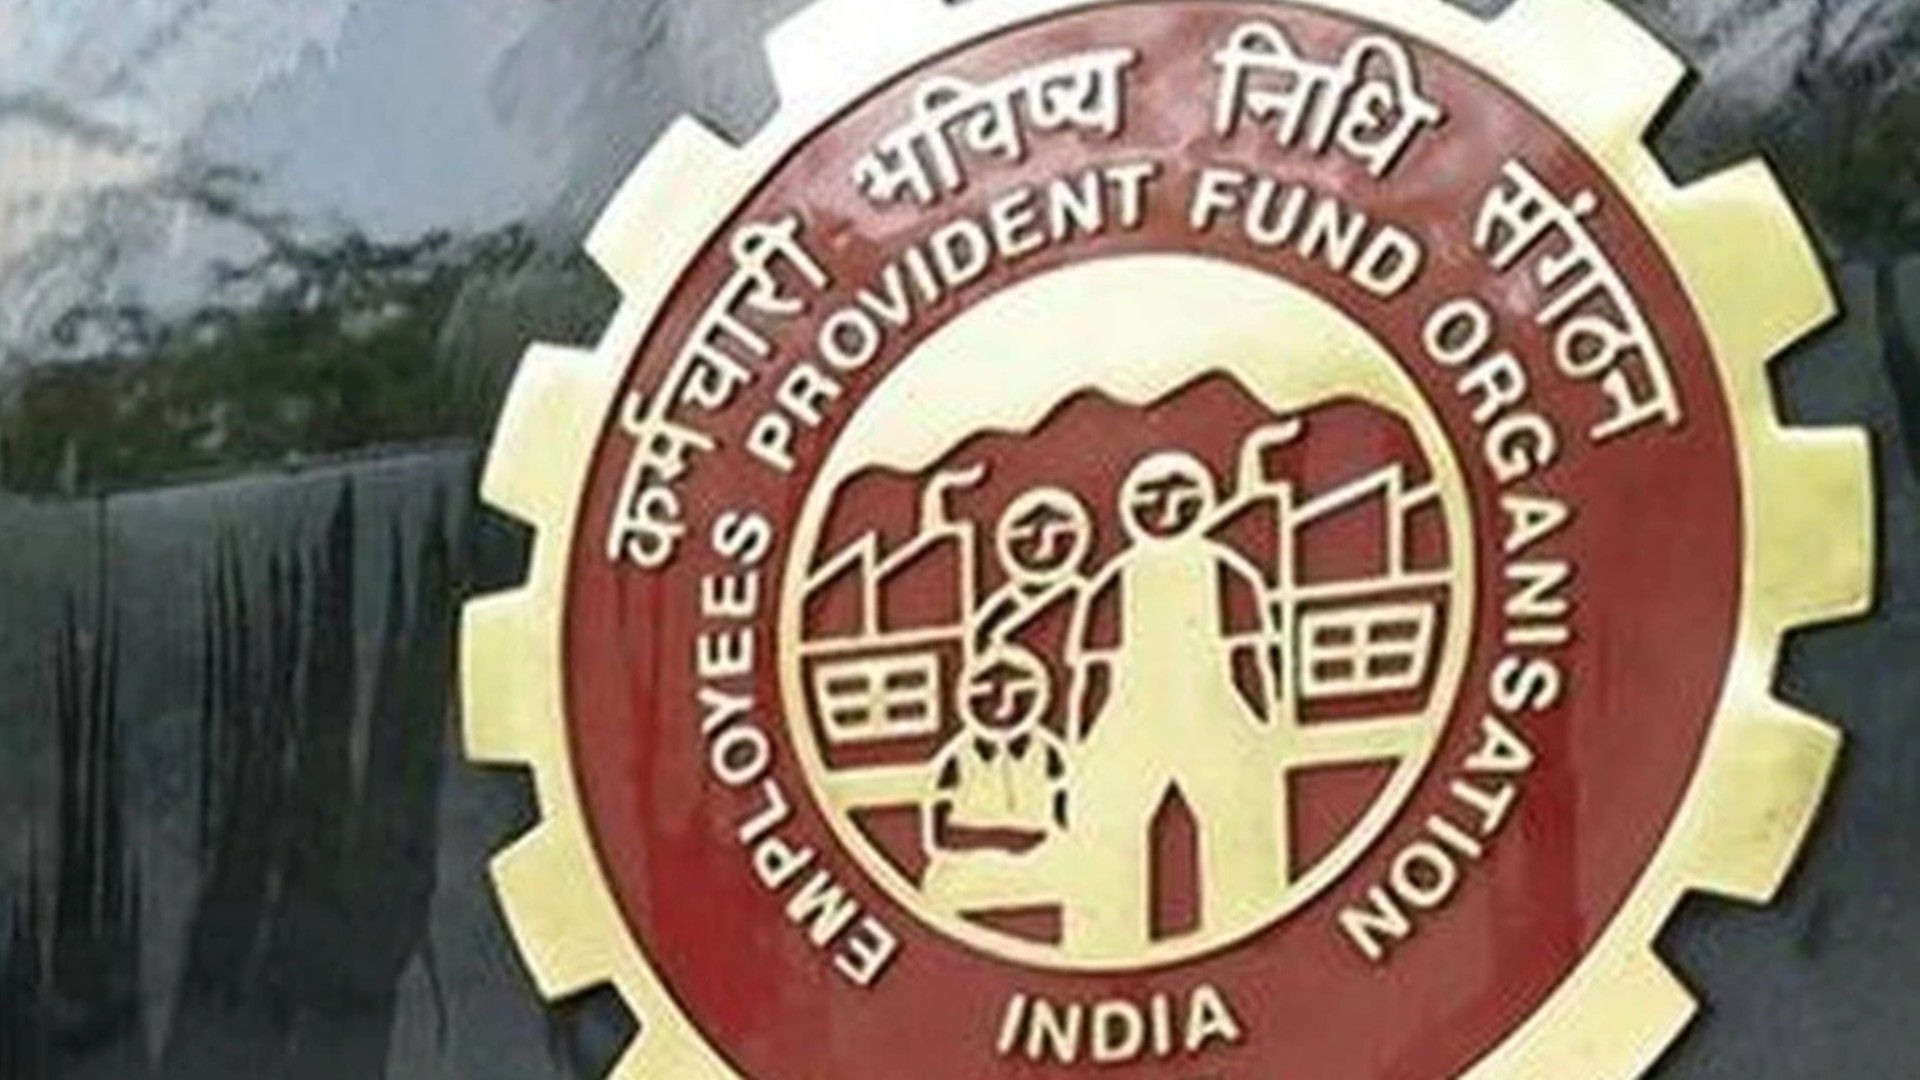 PF Contribution Of 50 Lakh Govt Employees Will Increase From This Date: Find Out Why?